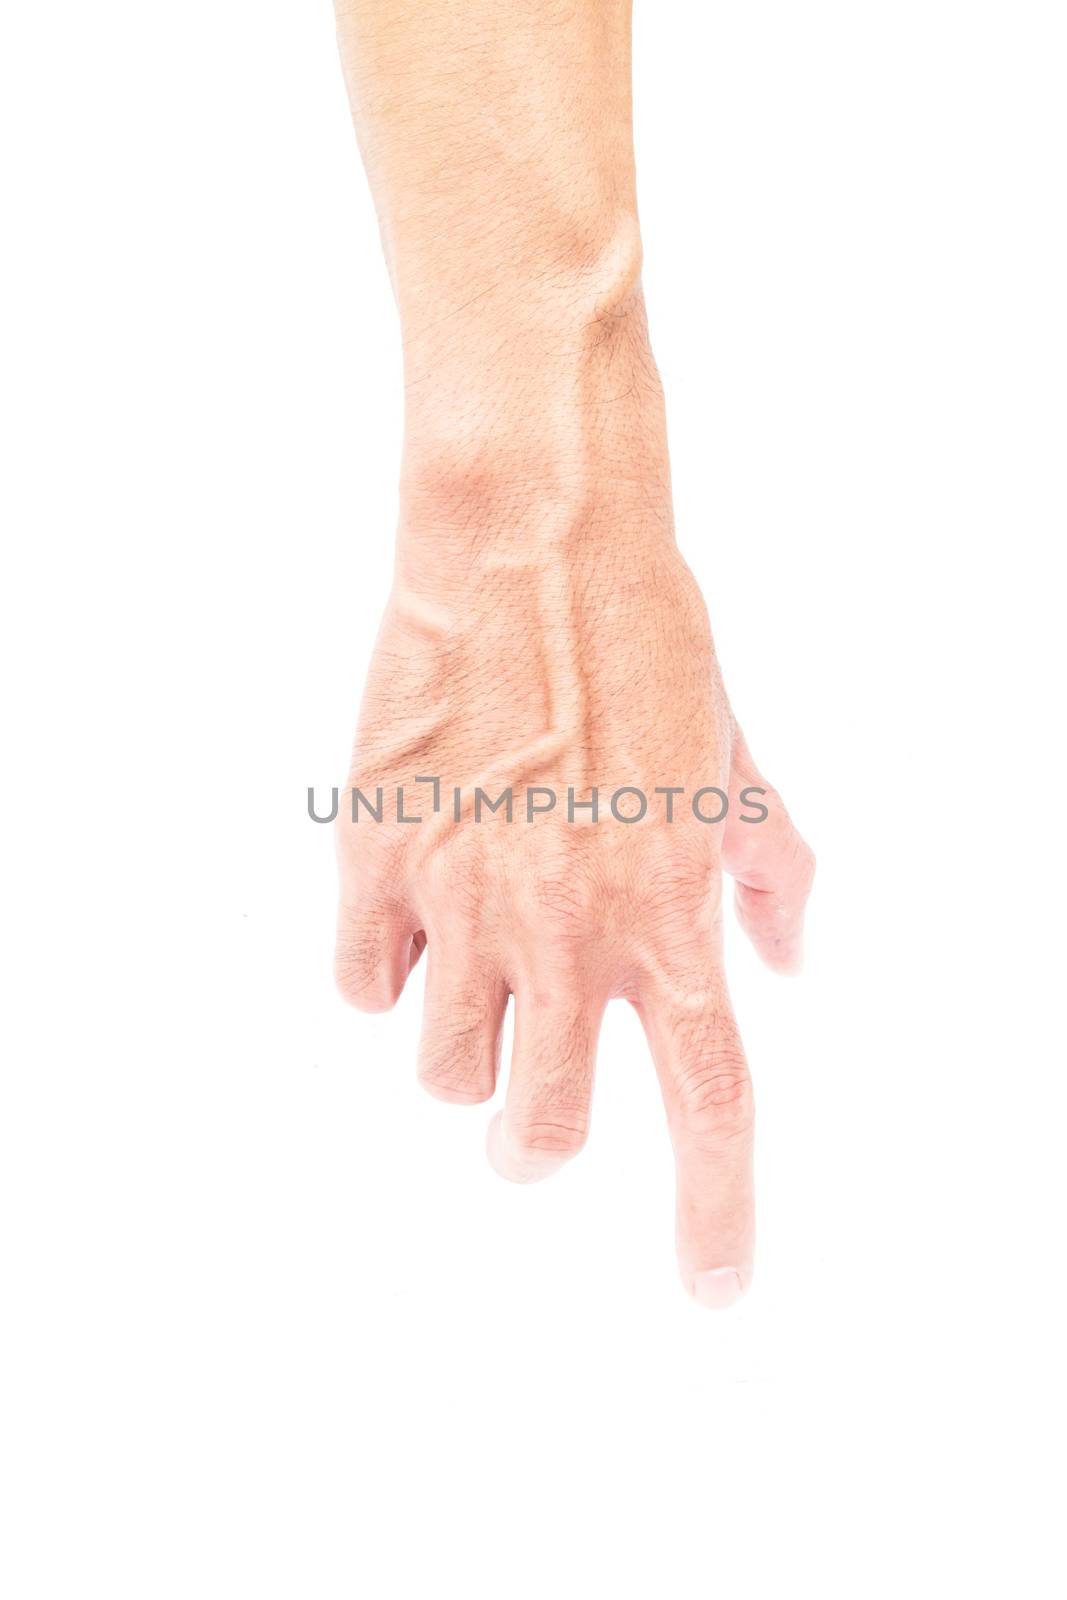 Man arm with blood veins on white background, health care concep by pt.pongsak@gmail.com